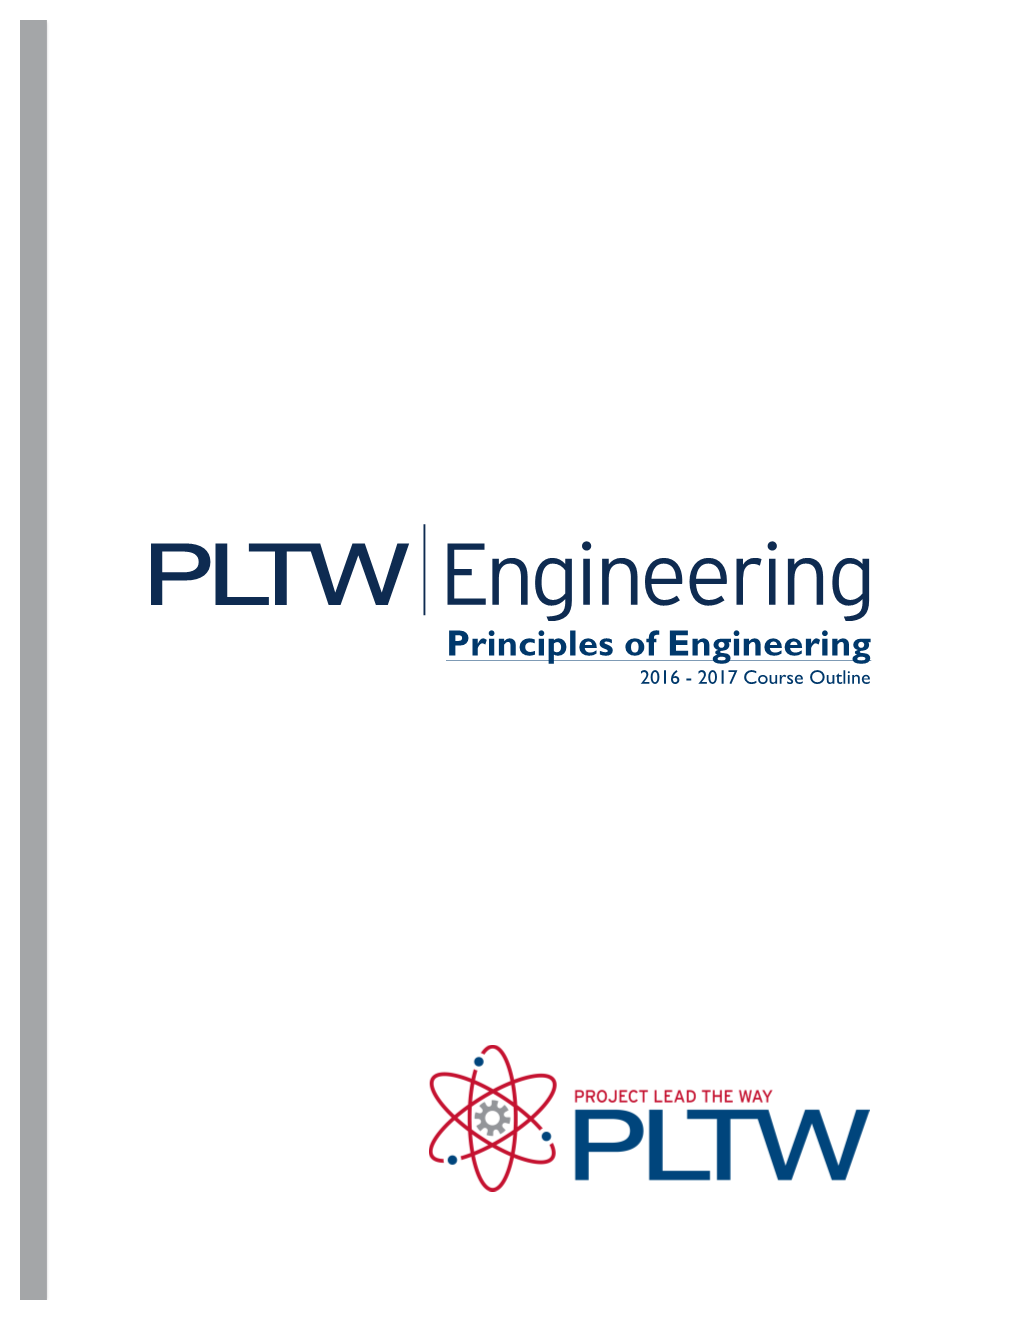 Principles of Engineering 2016 - 2017 Course Outline PLTW Engineering Principles of Engineering